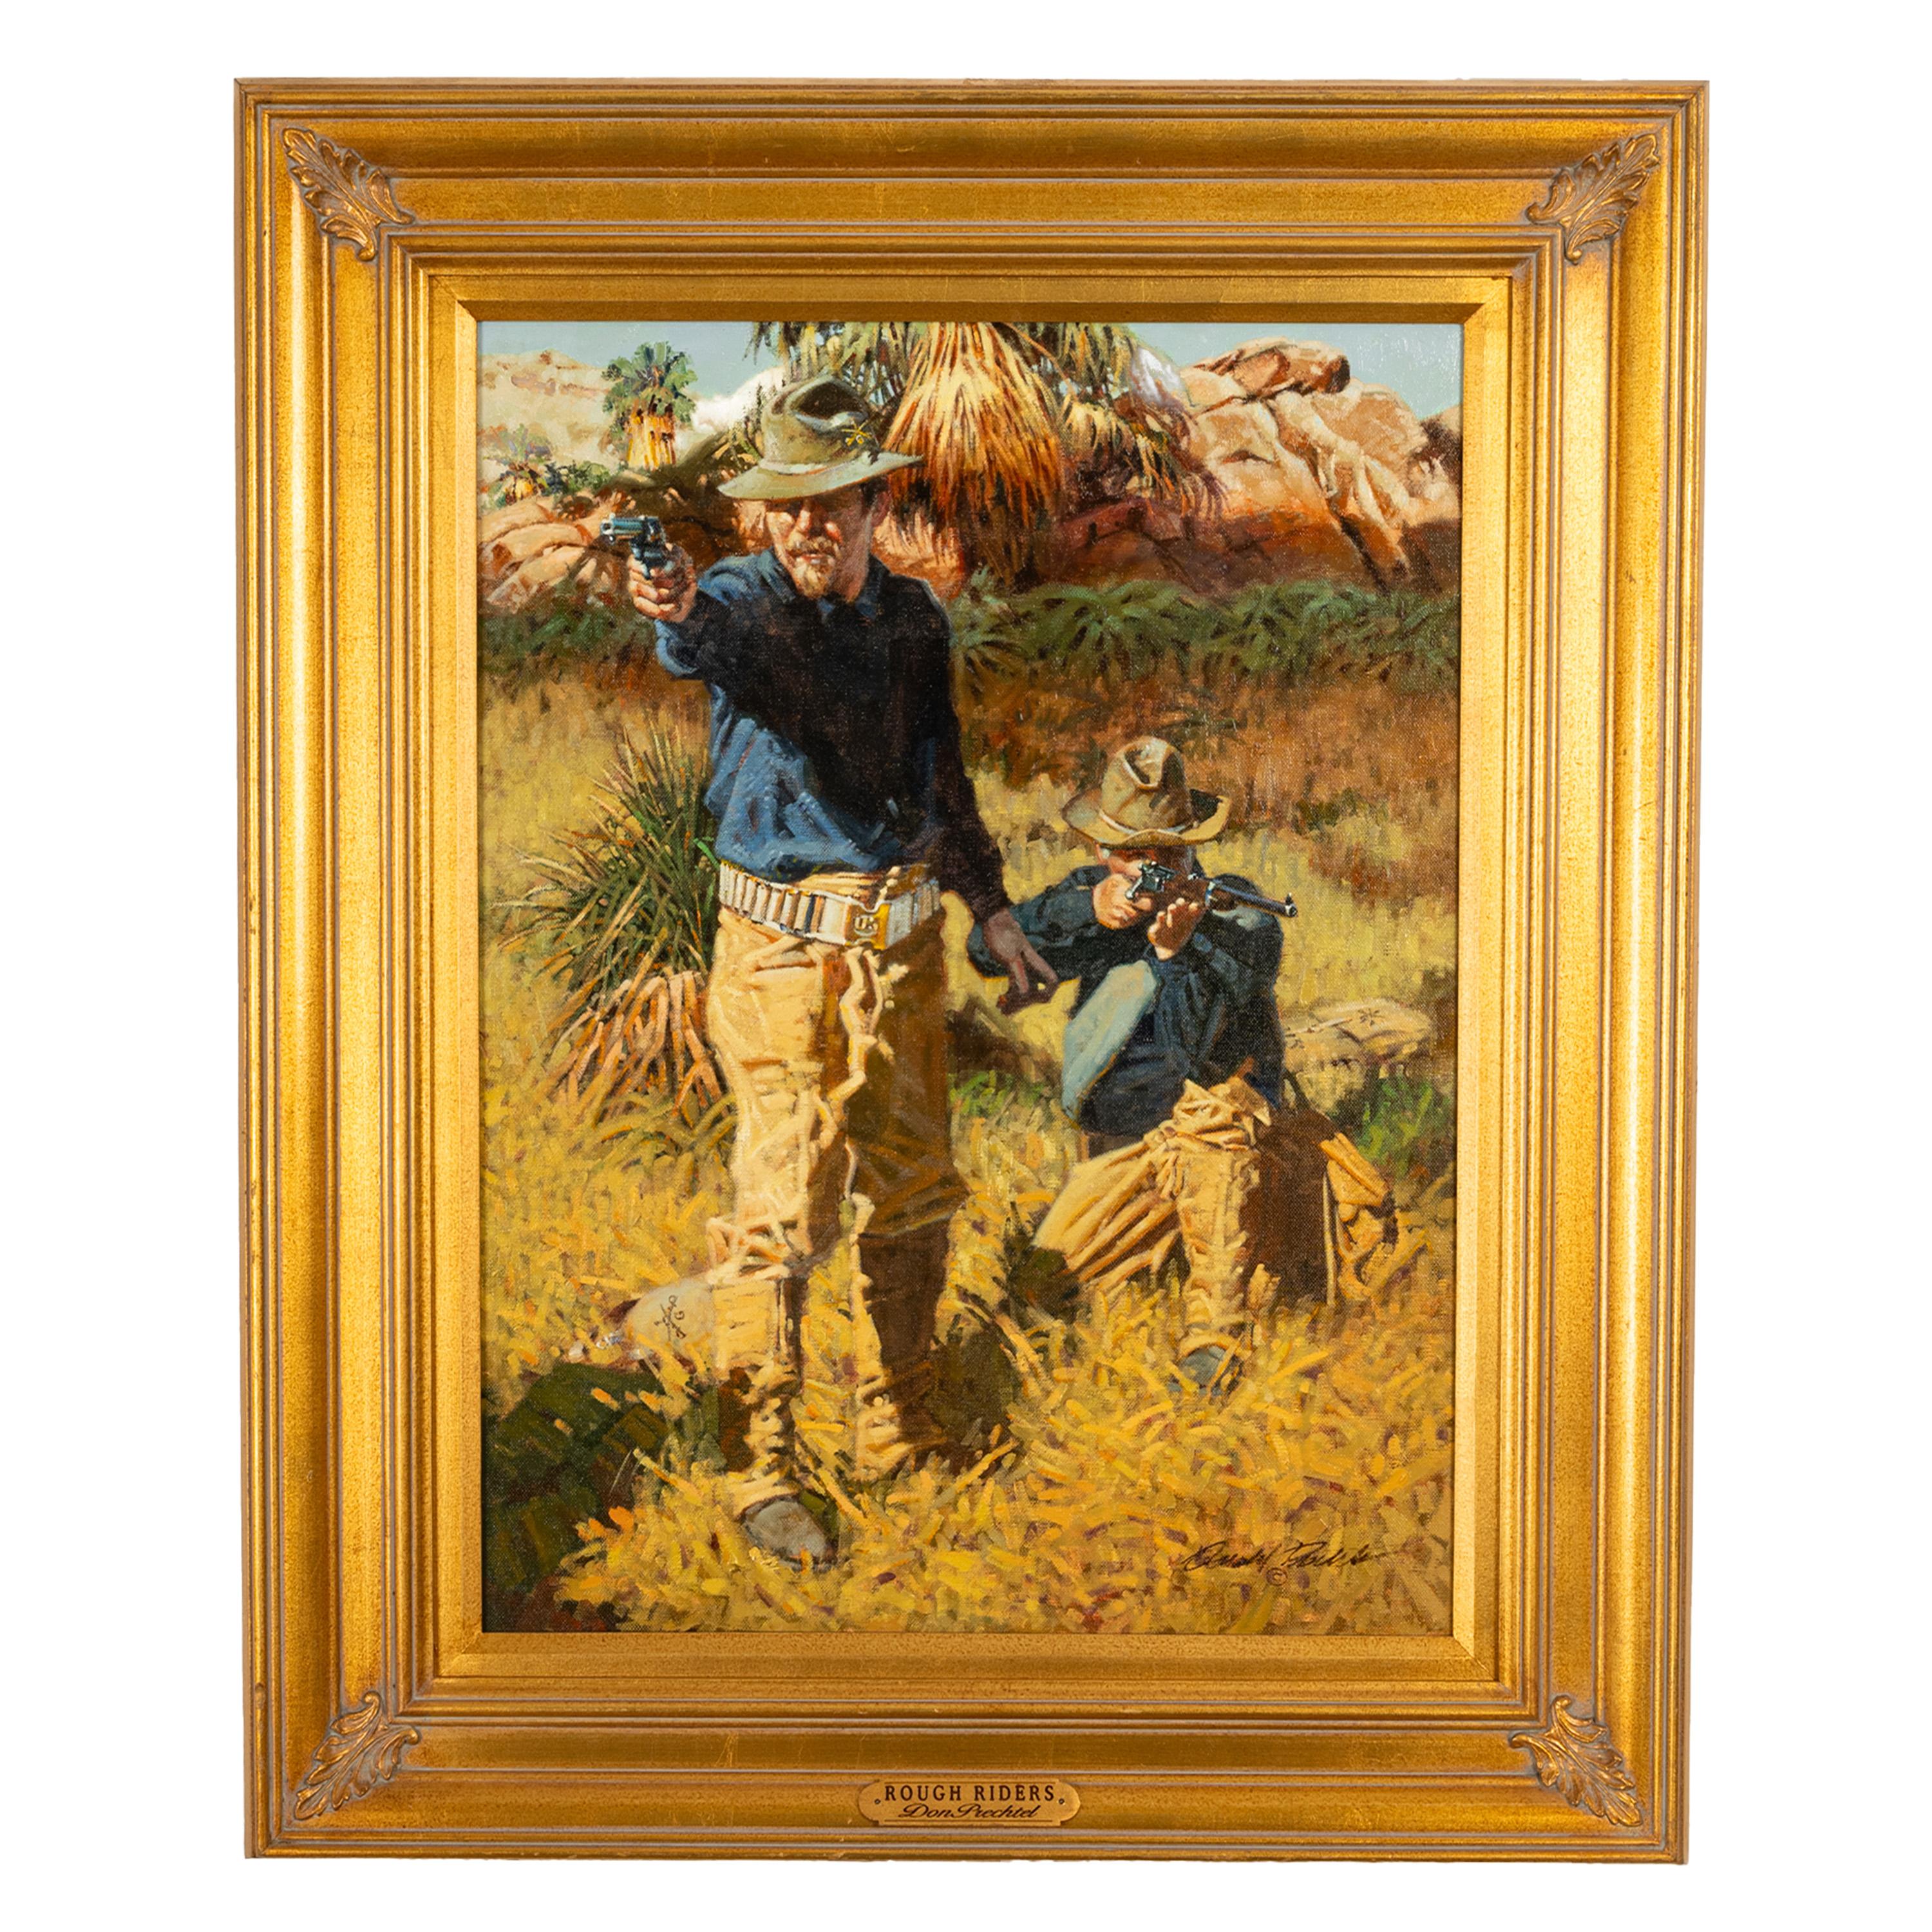 An original oil on canvas painting by Don Prechtel (1936), titled "Rough Riders", painted in the 1970s. The painting is in excellent condition, signed lower right and housed in the original gilded frame, with a title & name-plate to the base of the